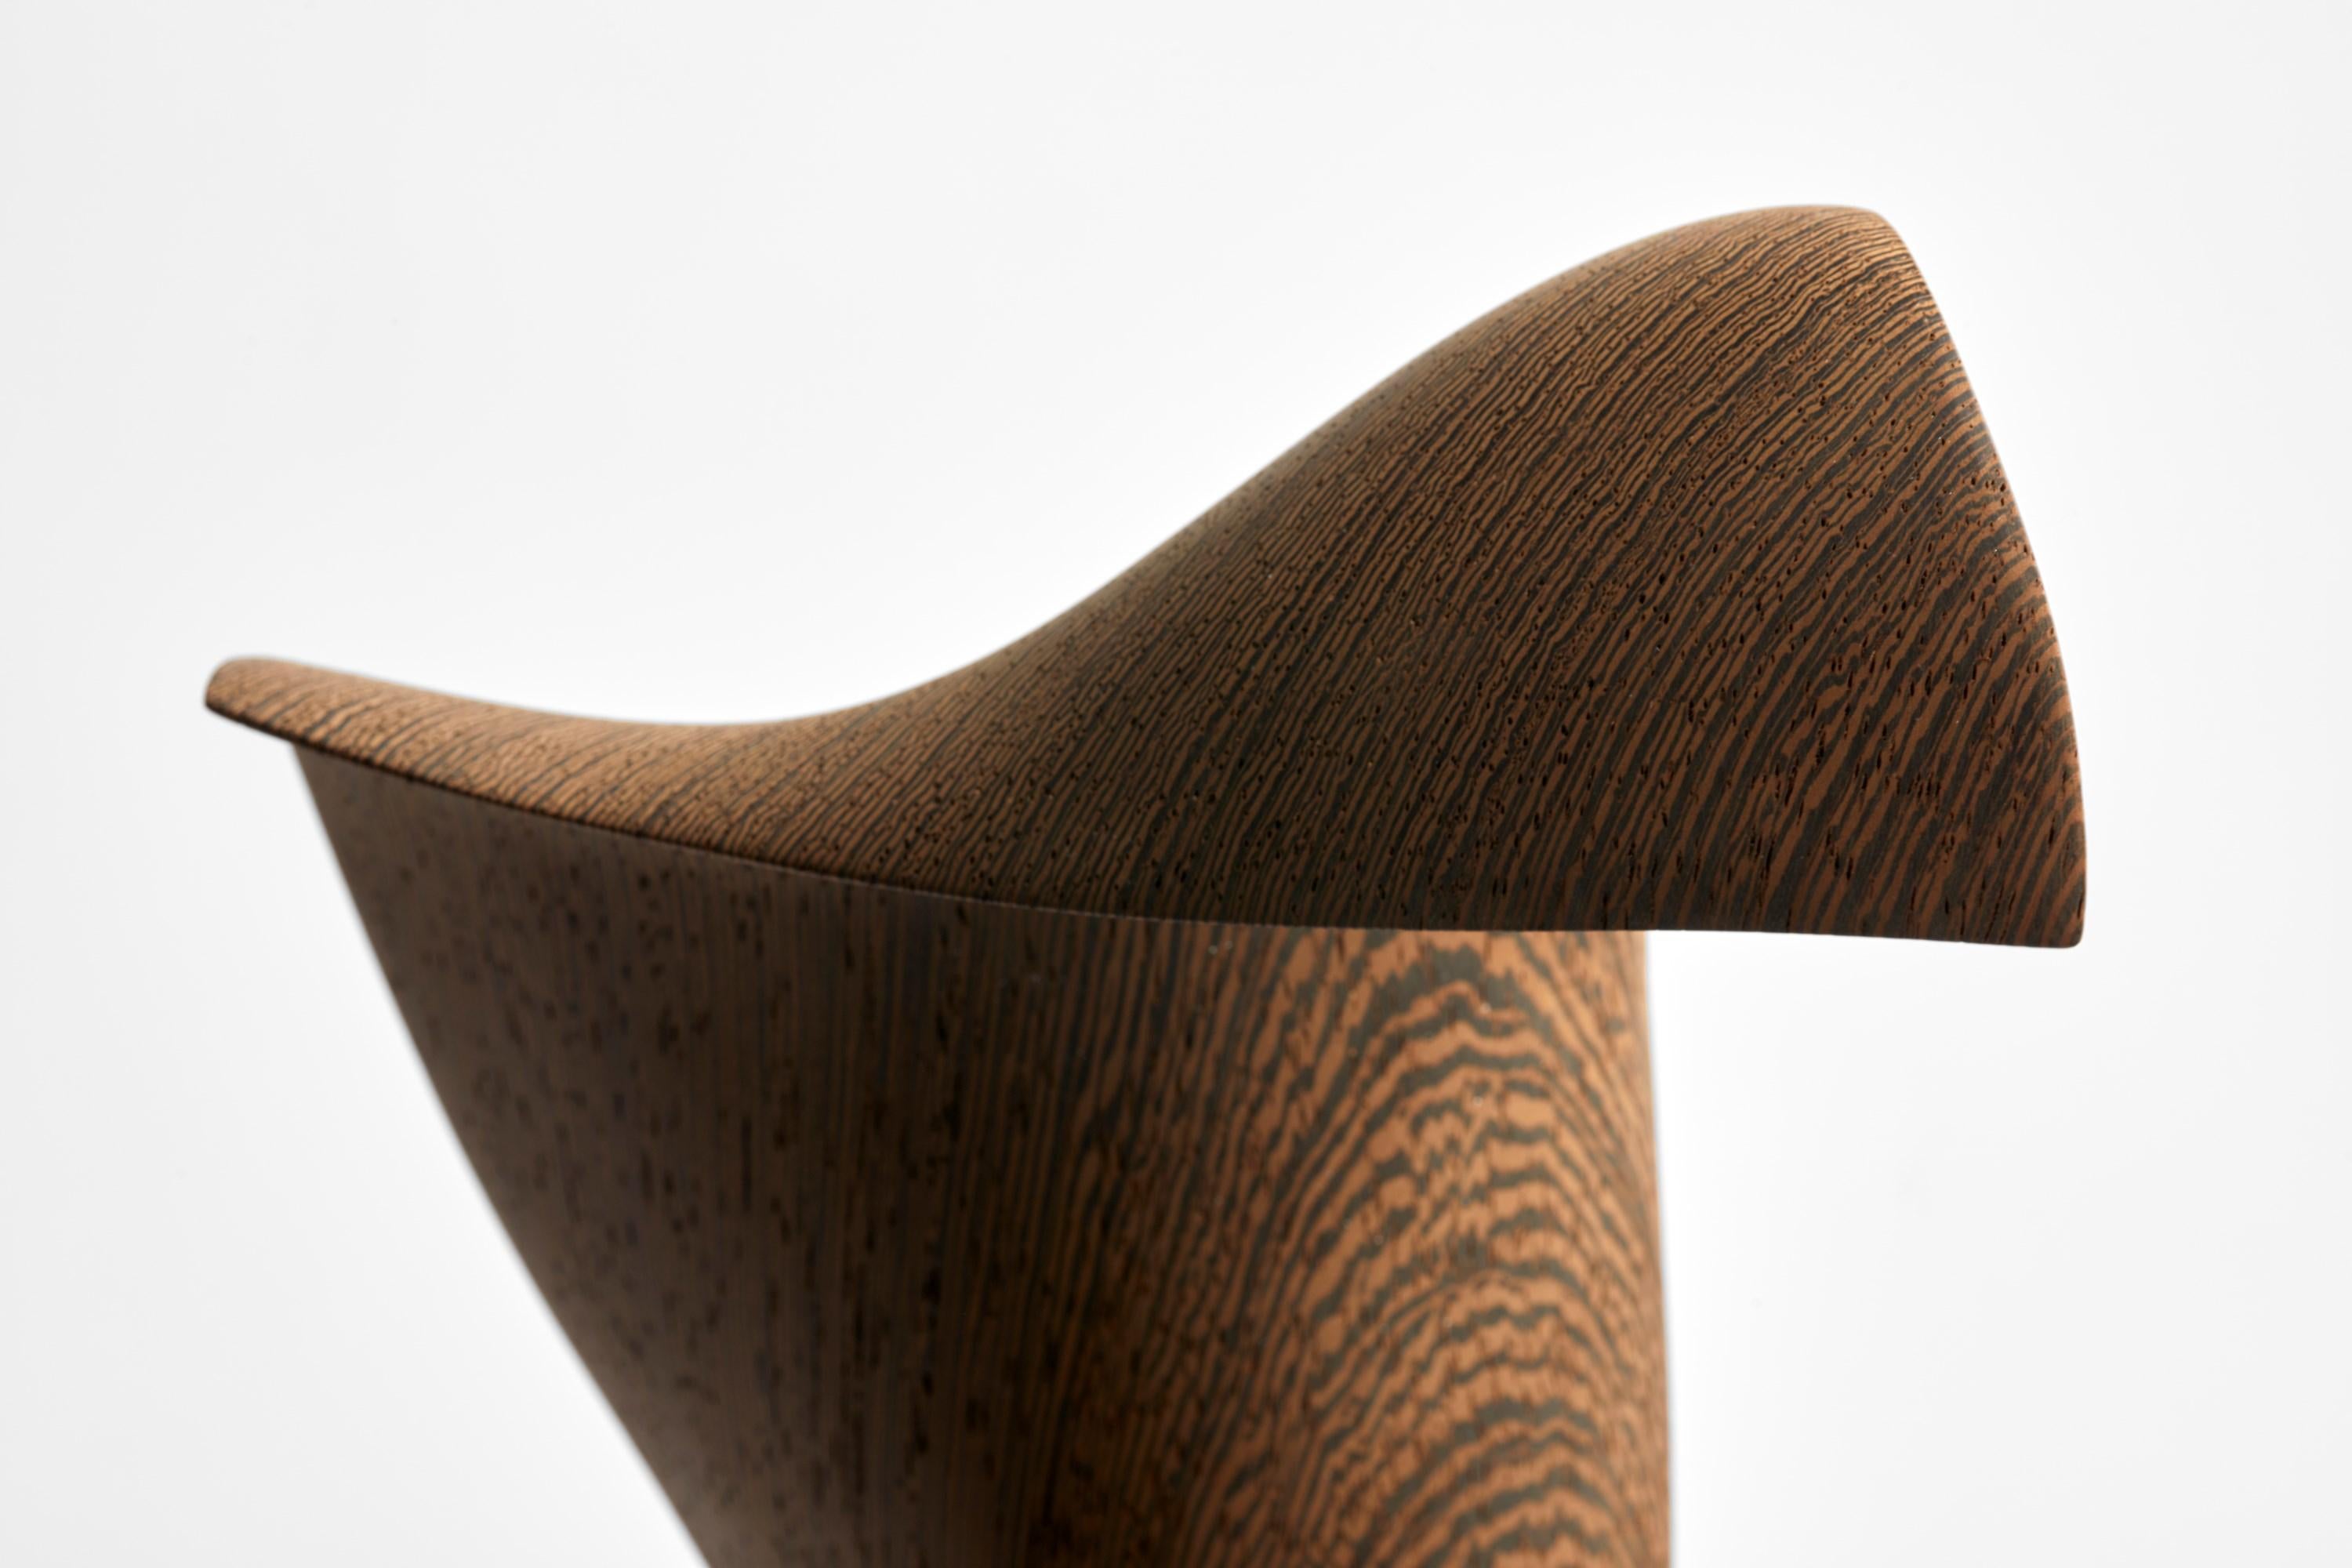 Contemporary Flow Petit No 3, an Abstract Wooden Sculpture by the Danish Studio Egeværk